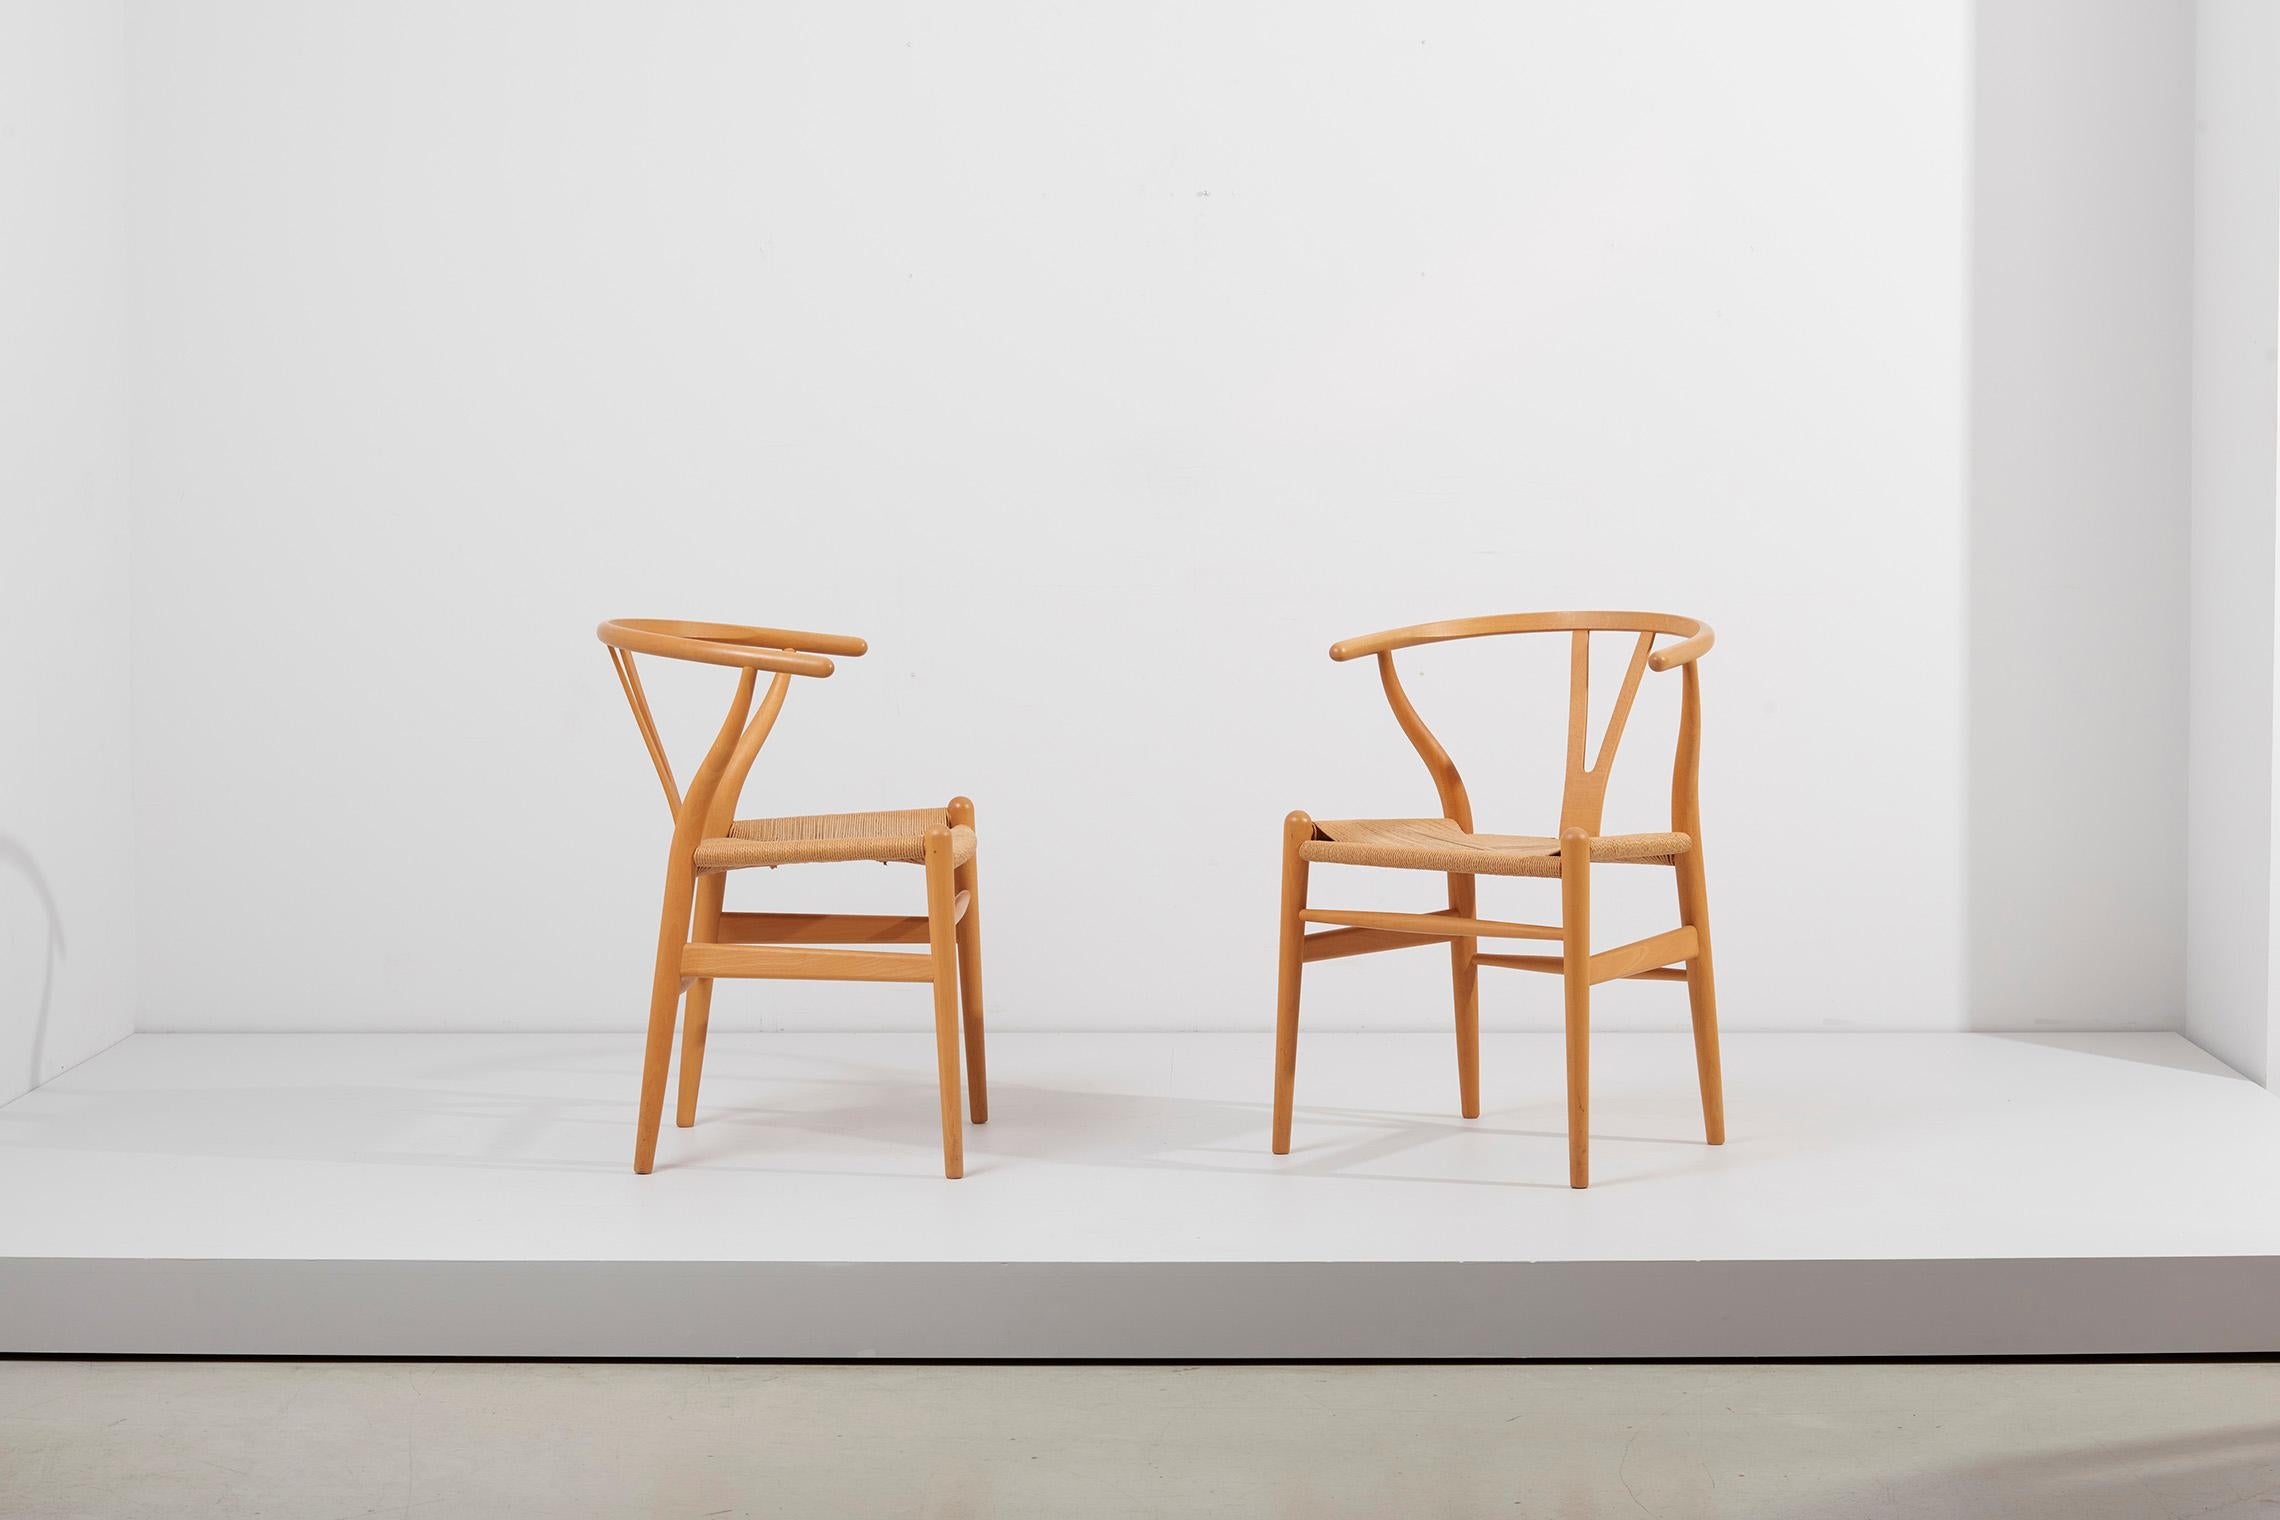 Pair of Hans Wegner Wishbone chair in Beech, Denmark 1960s. The chair is also known as the 